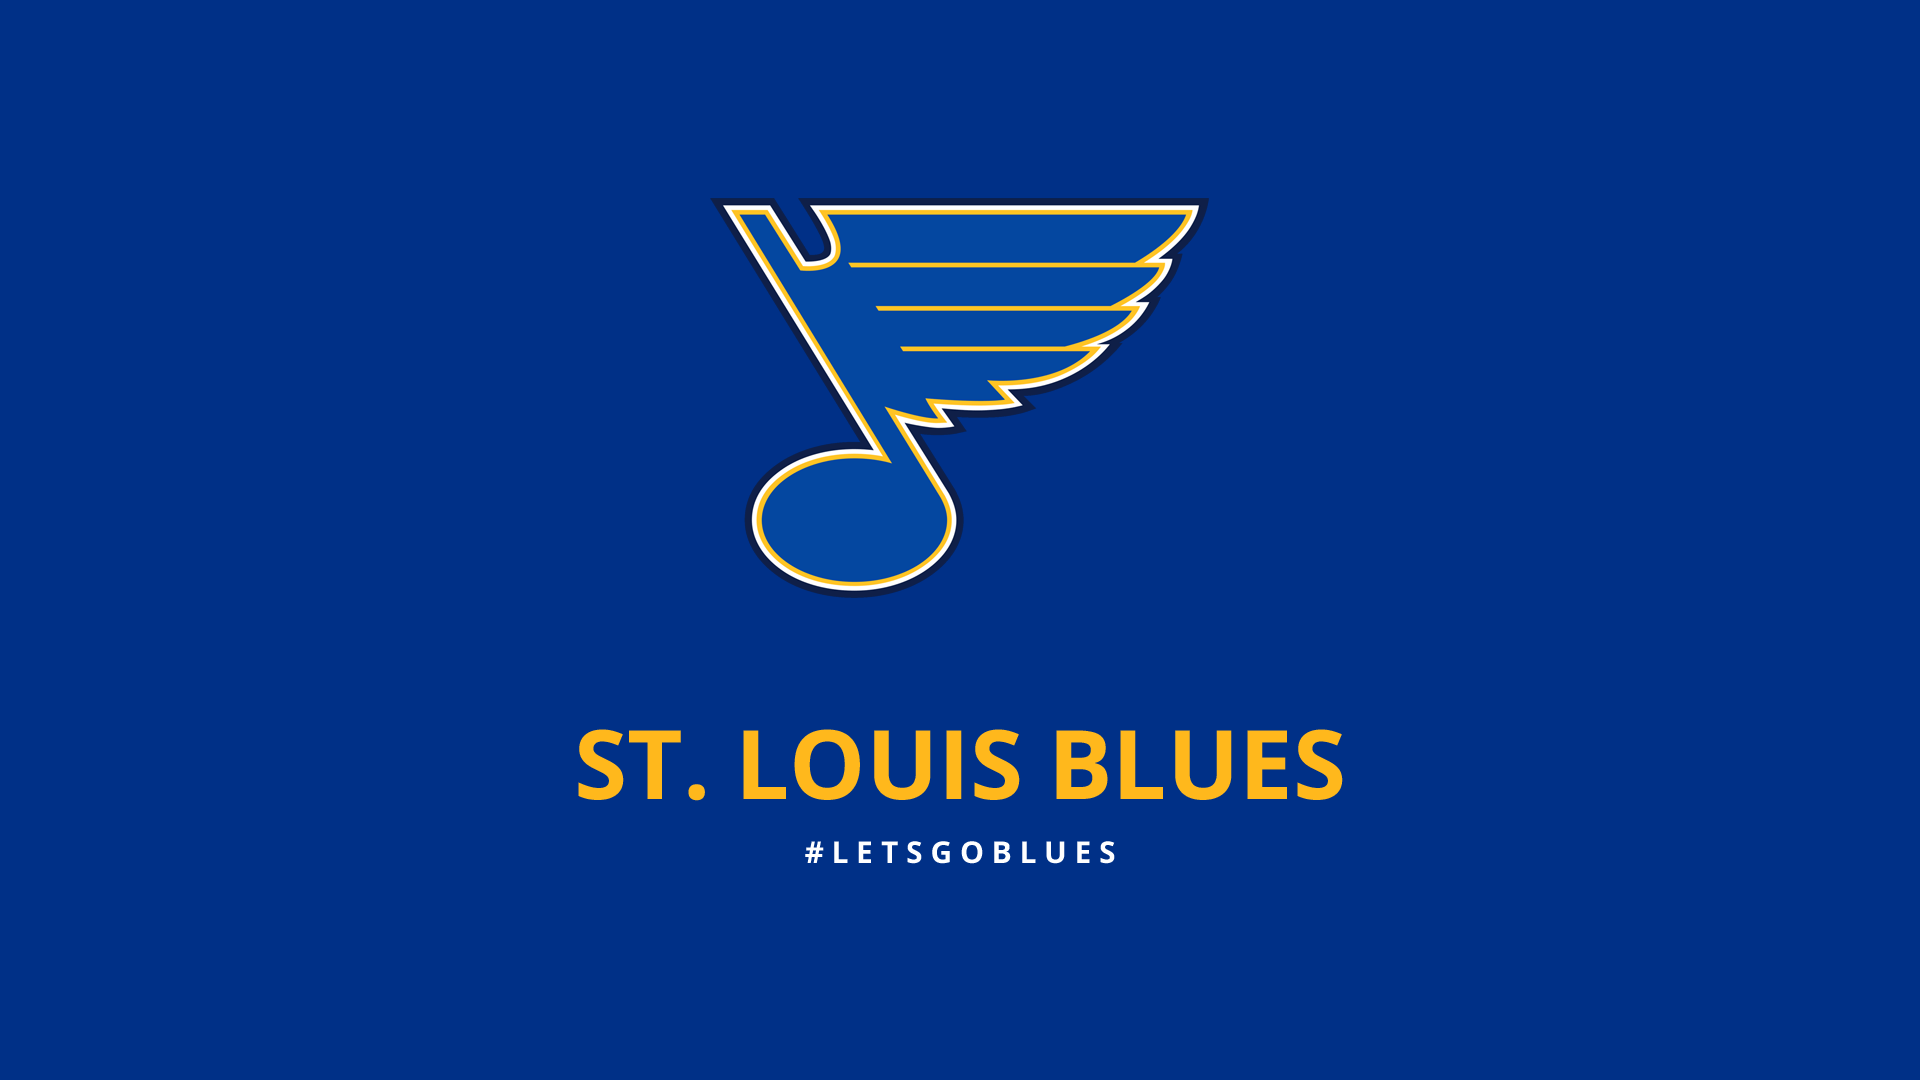 St. Louis Blues Hockey Logo - Get Your Tickets Today: St. Louis Blues Hockey on December 9 ...